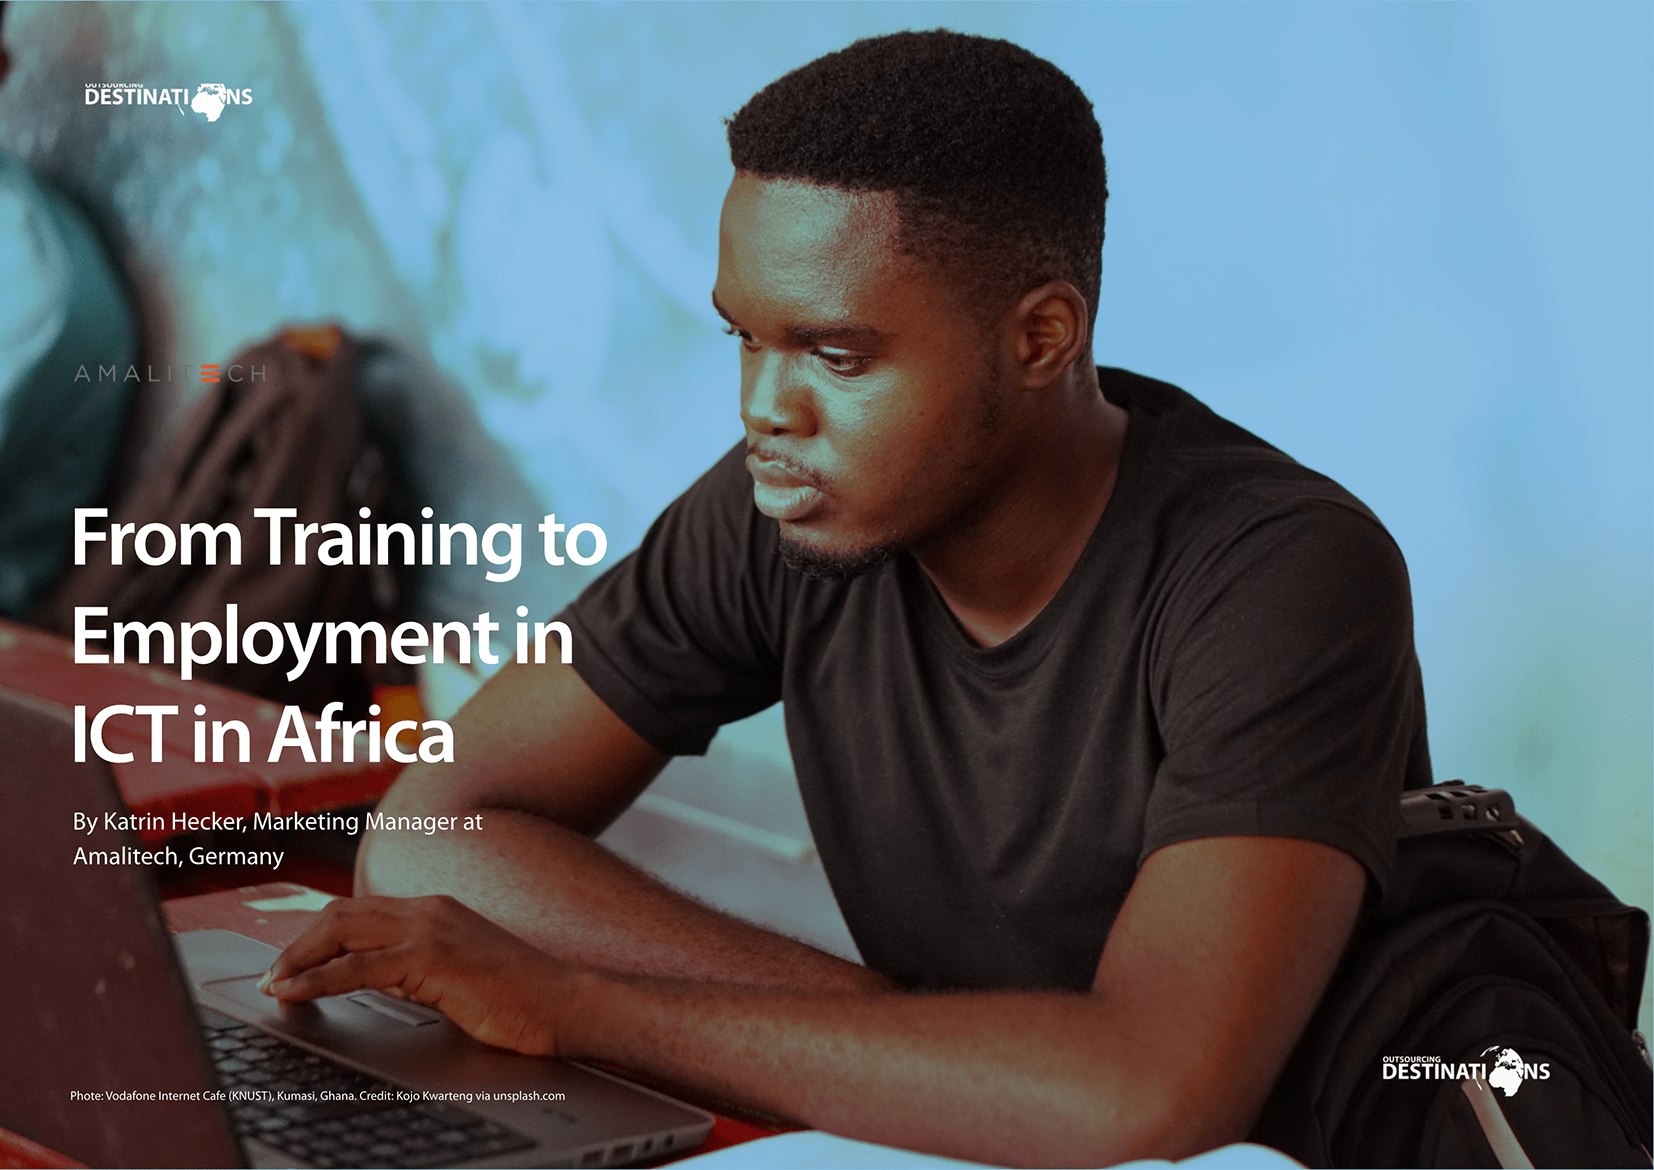 From Training to Employment in ICT in Africa